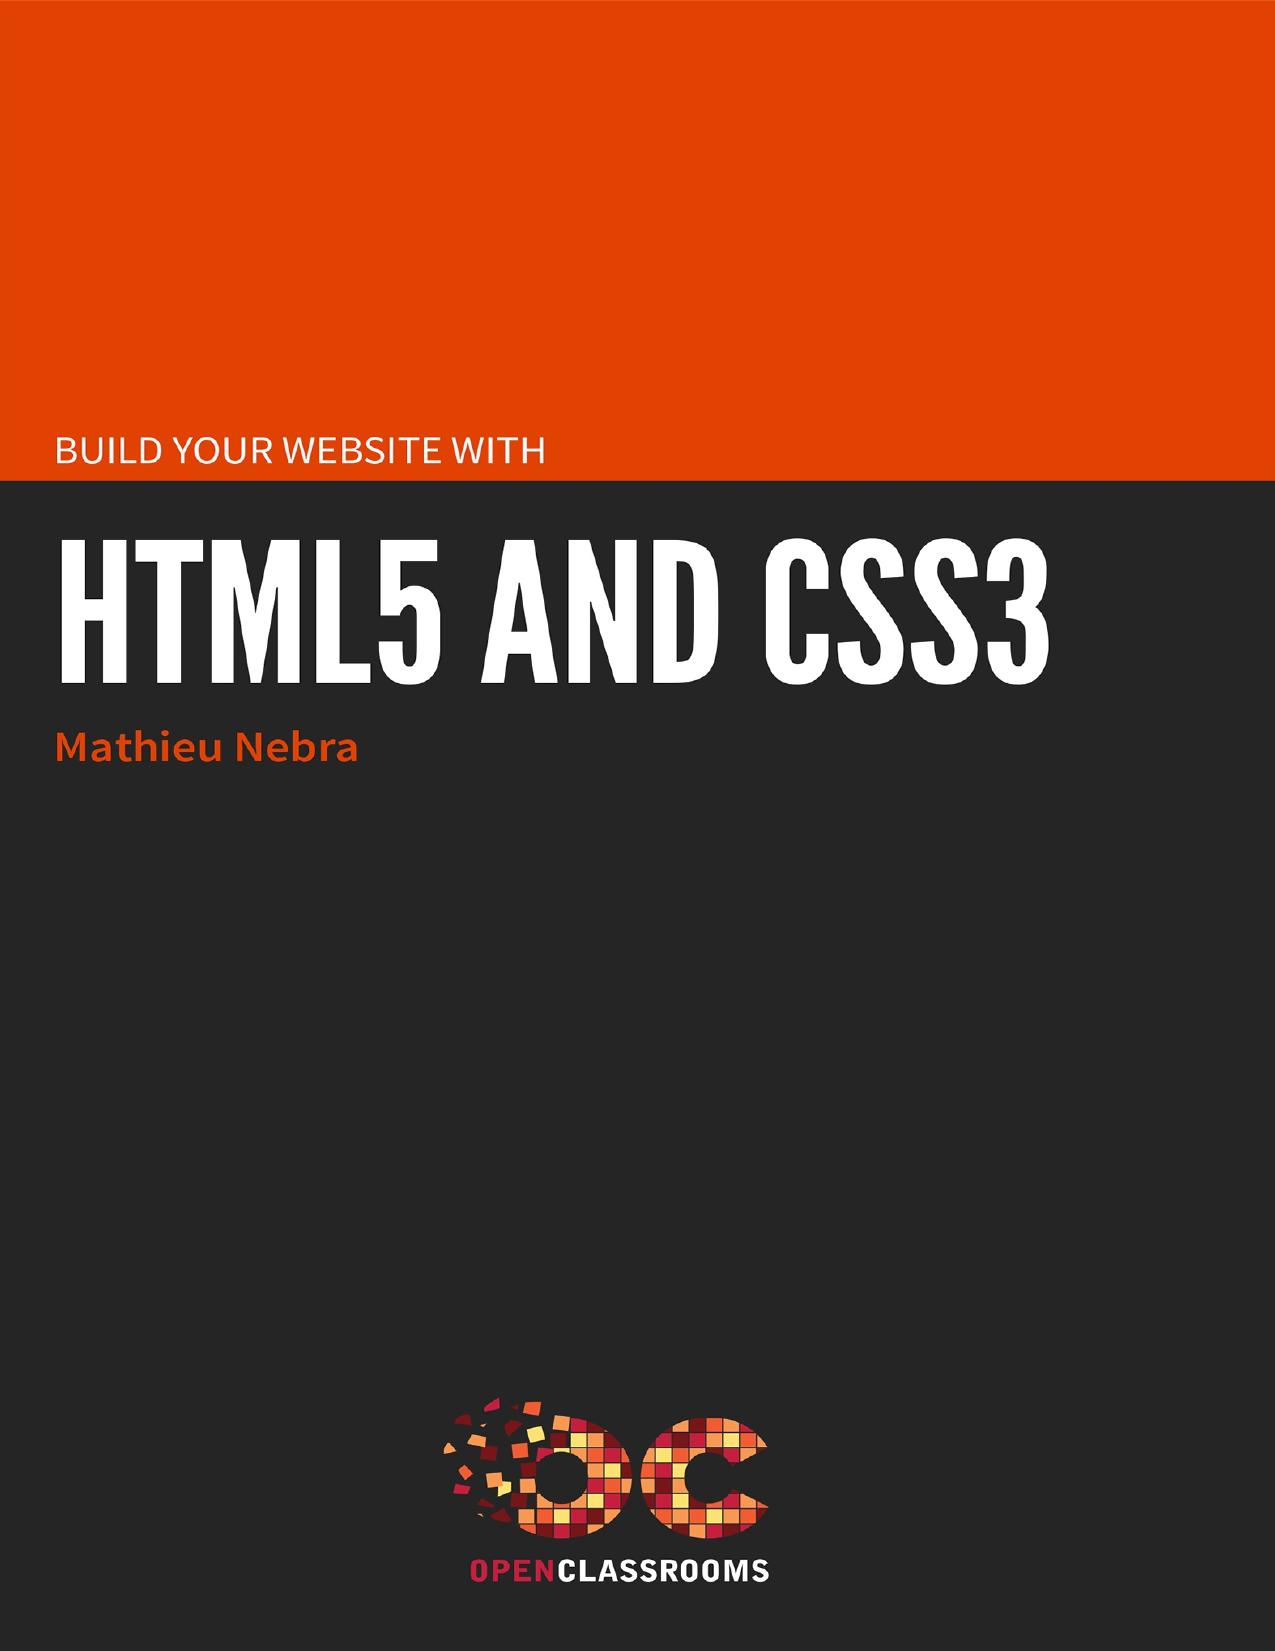 Build your website with HTML5 and CSS3